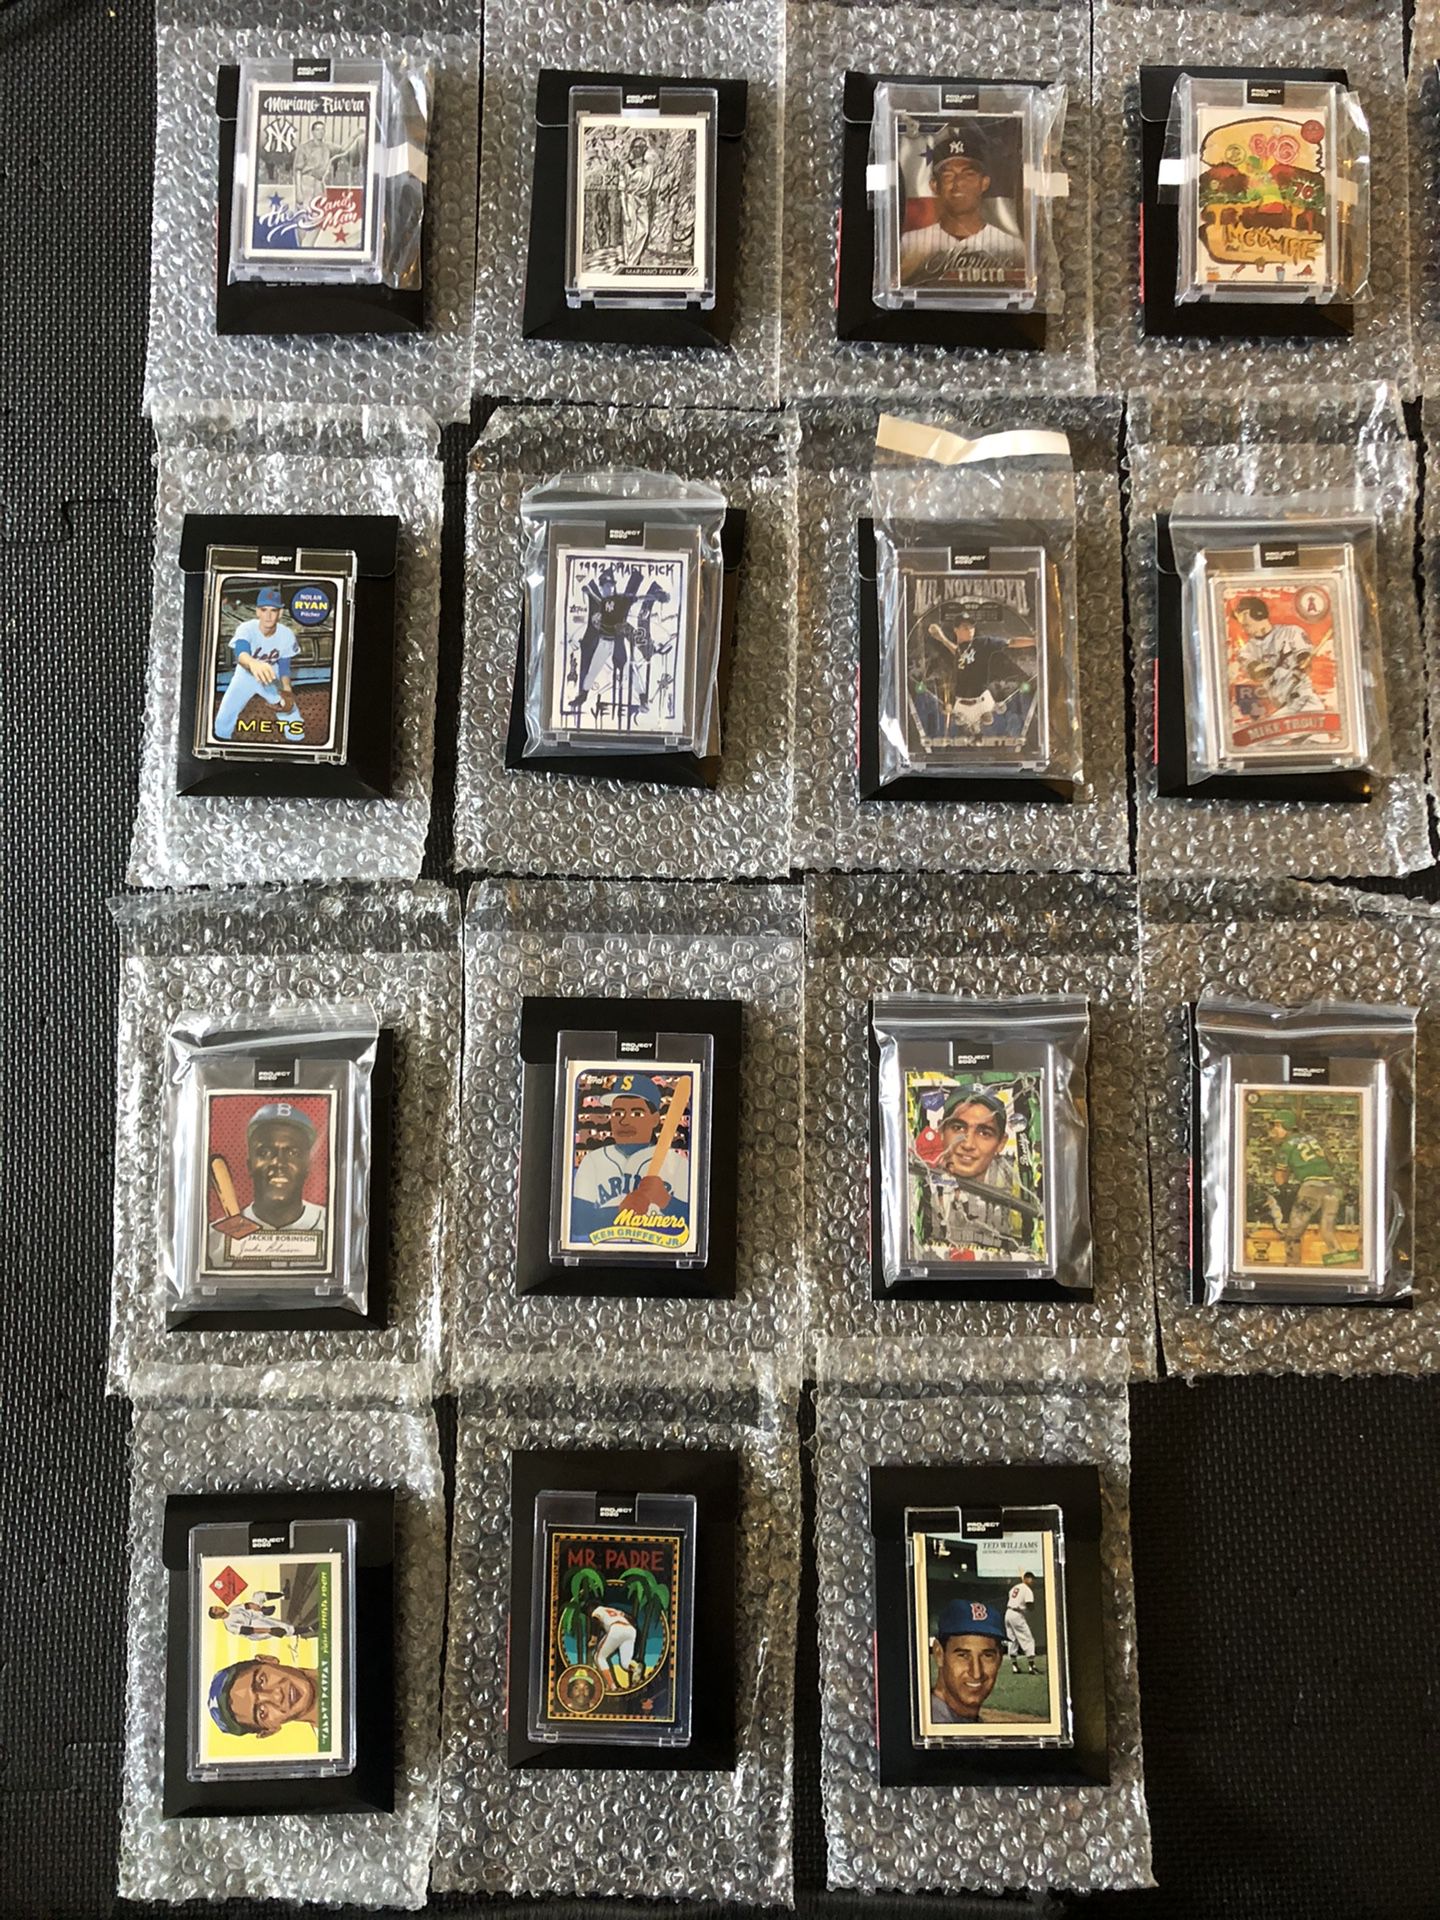 21 project 2020 Topps baseball cards for sale